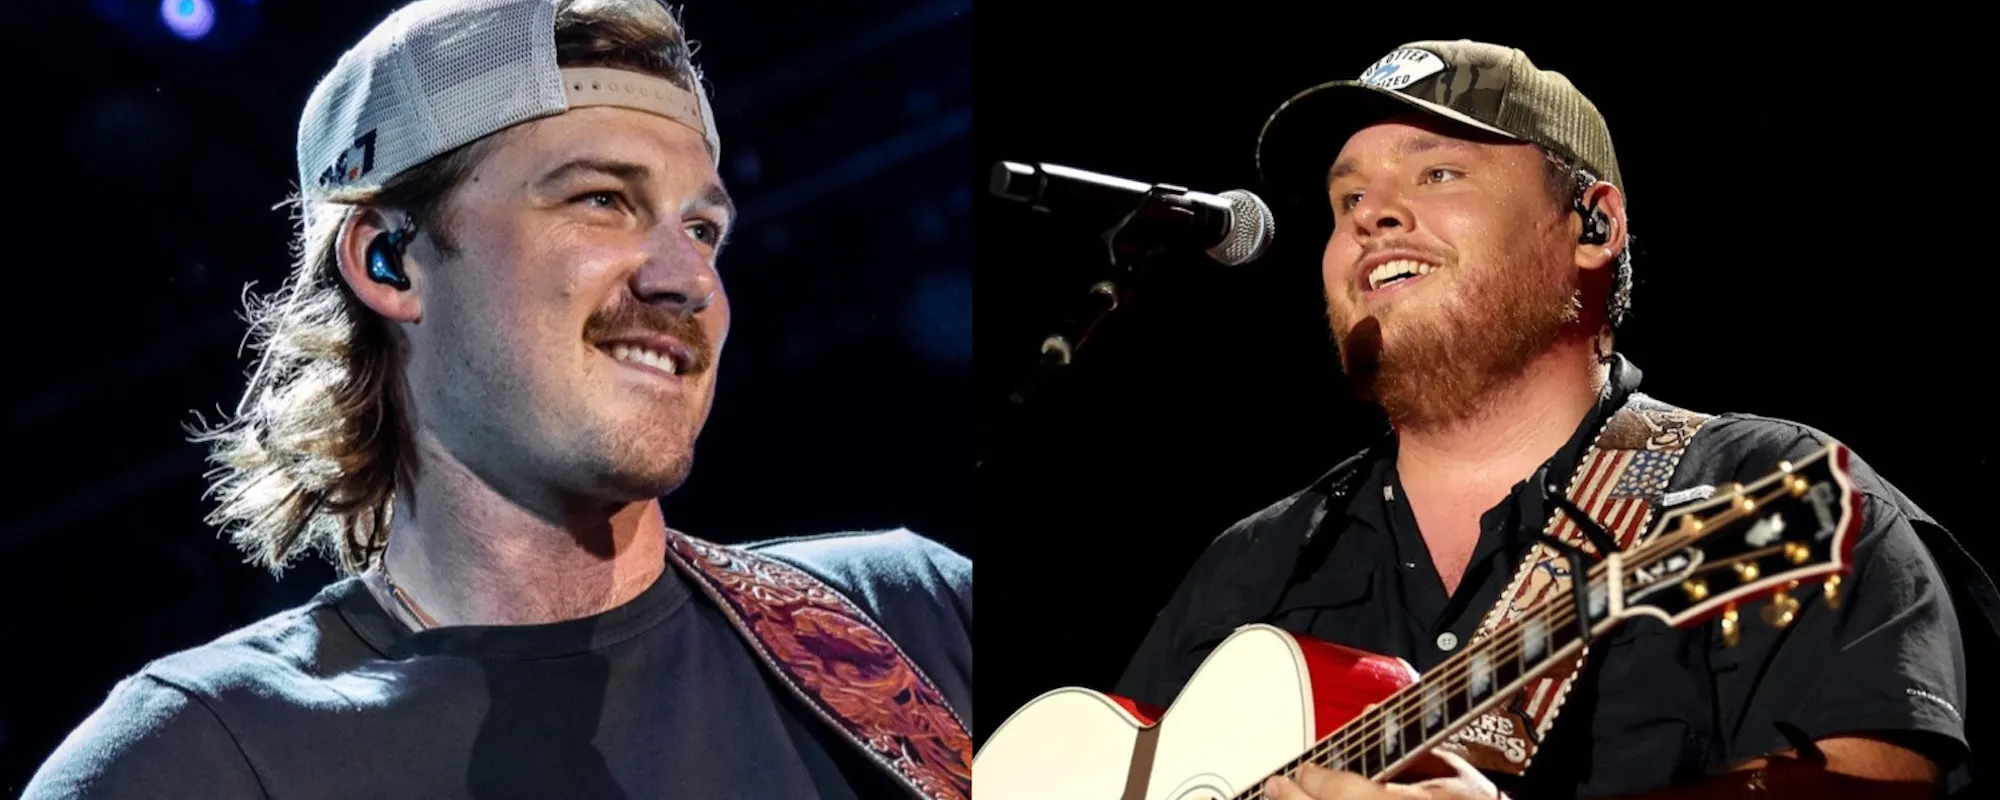 Morgan Wallen, Luke Combs Land First Nos. 1 and 2 Country Songs on Billboard Hot 100 in 42 Years